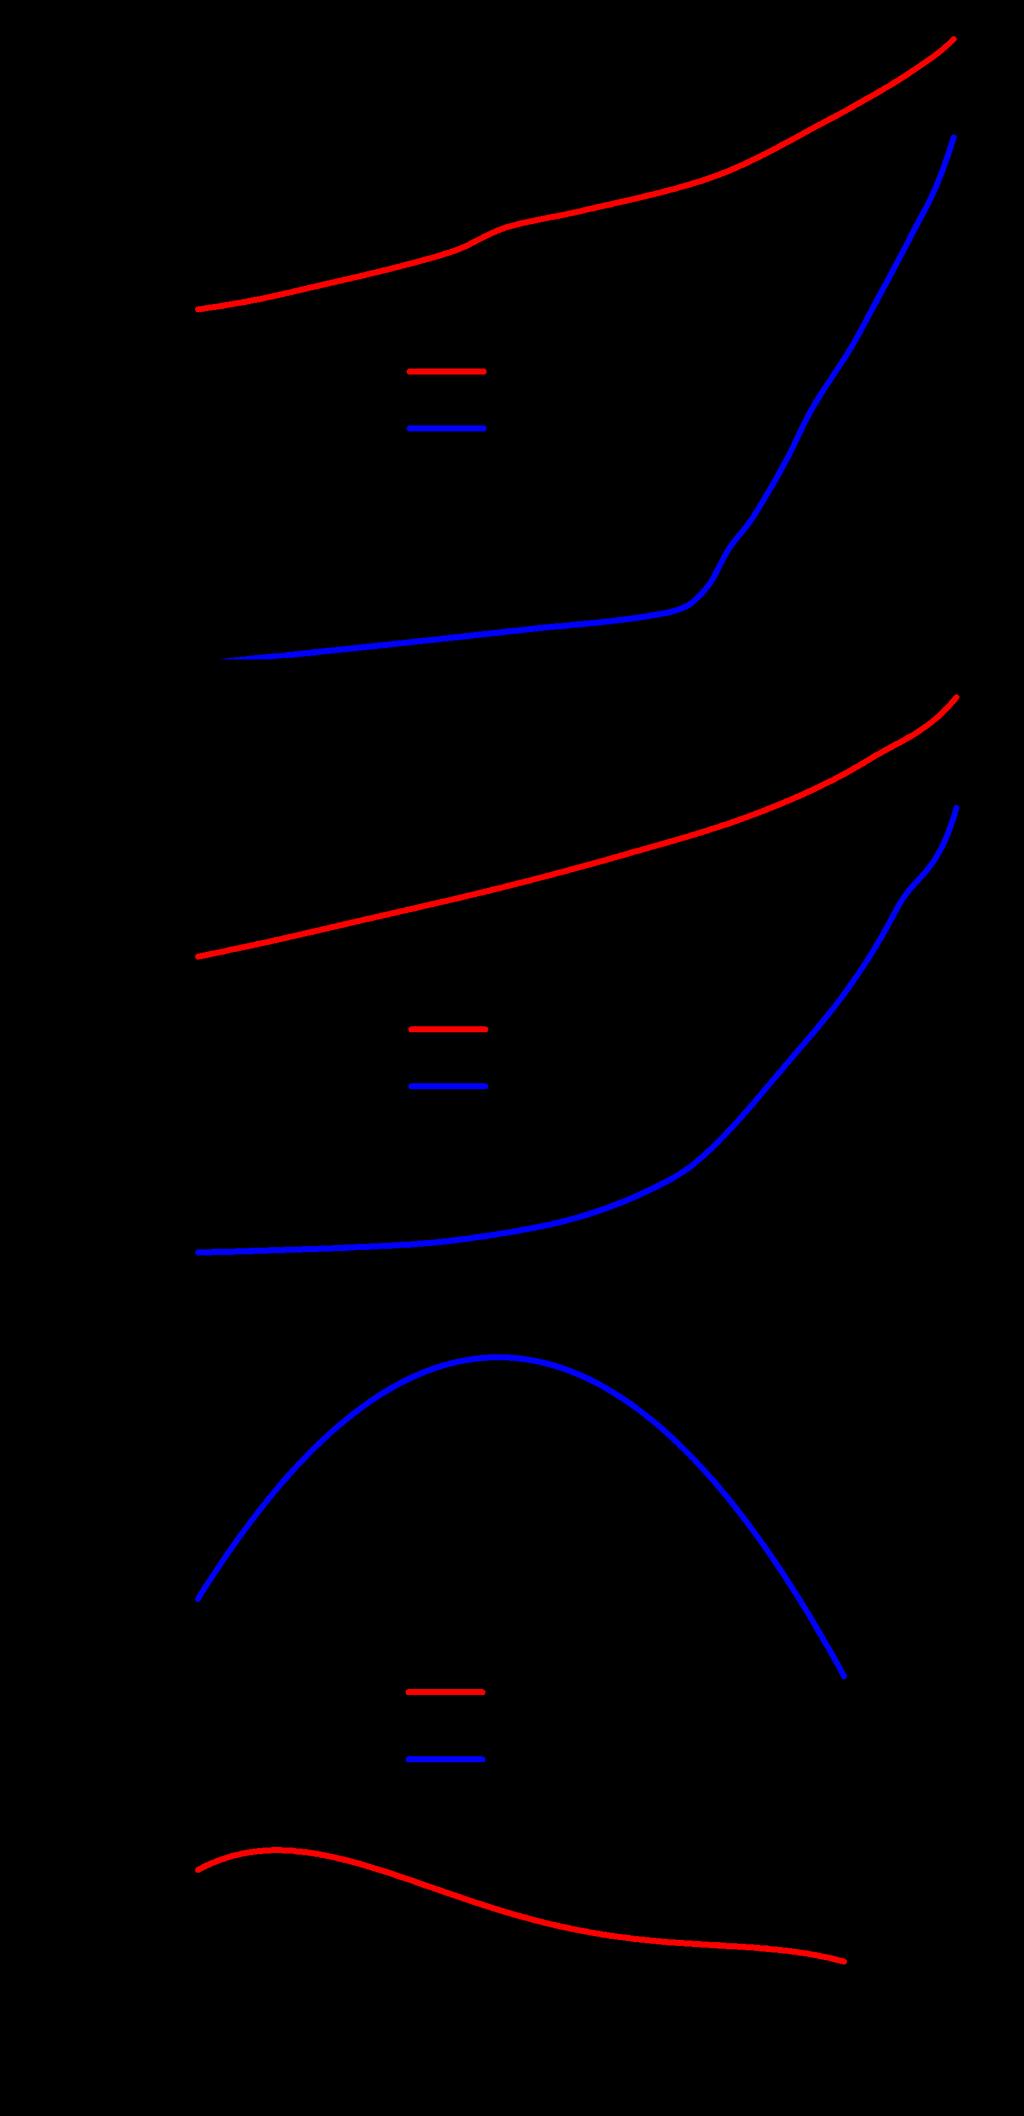 In the direct bimodal AM both A 1 and A 2 decrease with respect z c over similar range (Figure 6a).